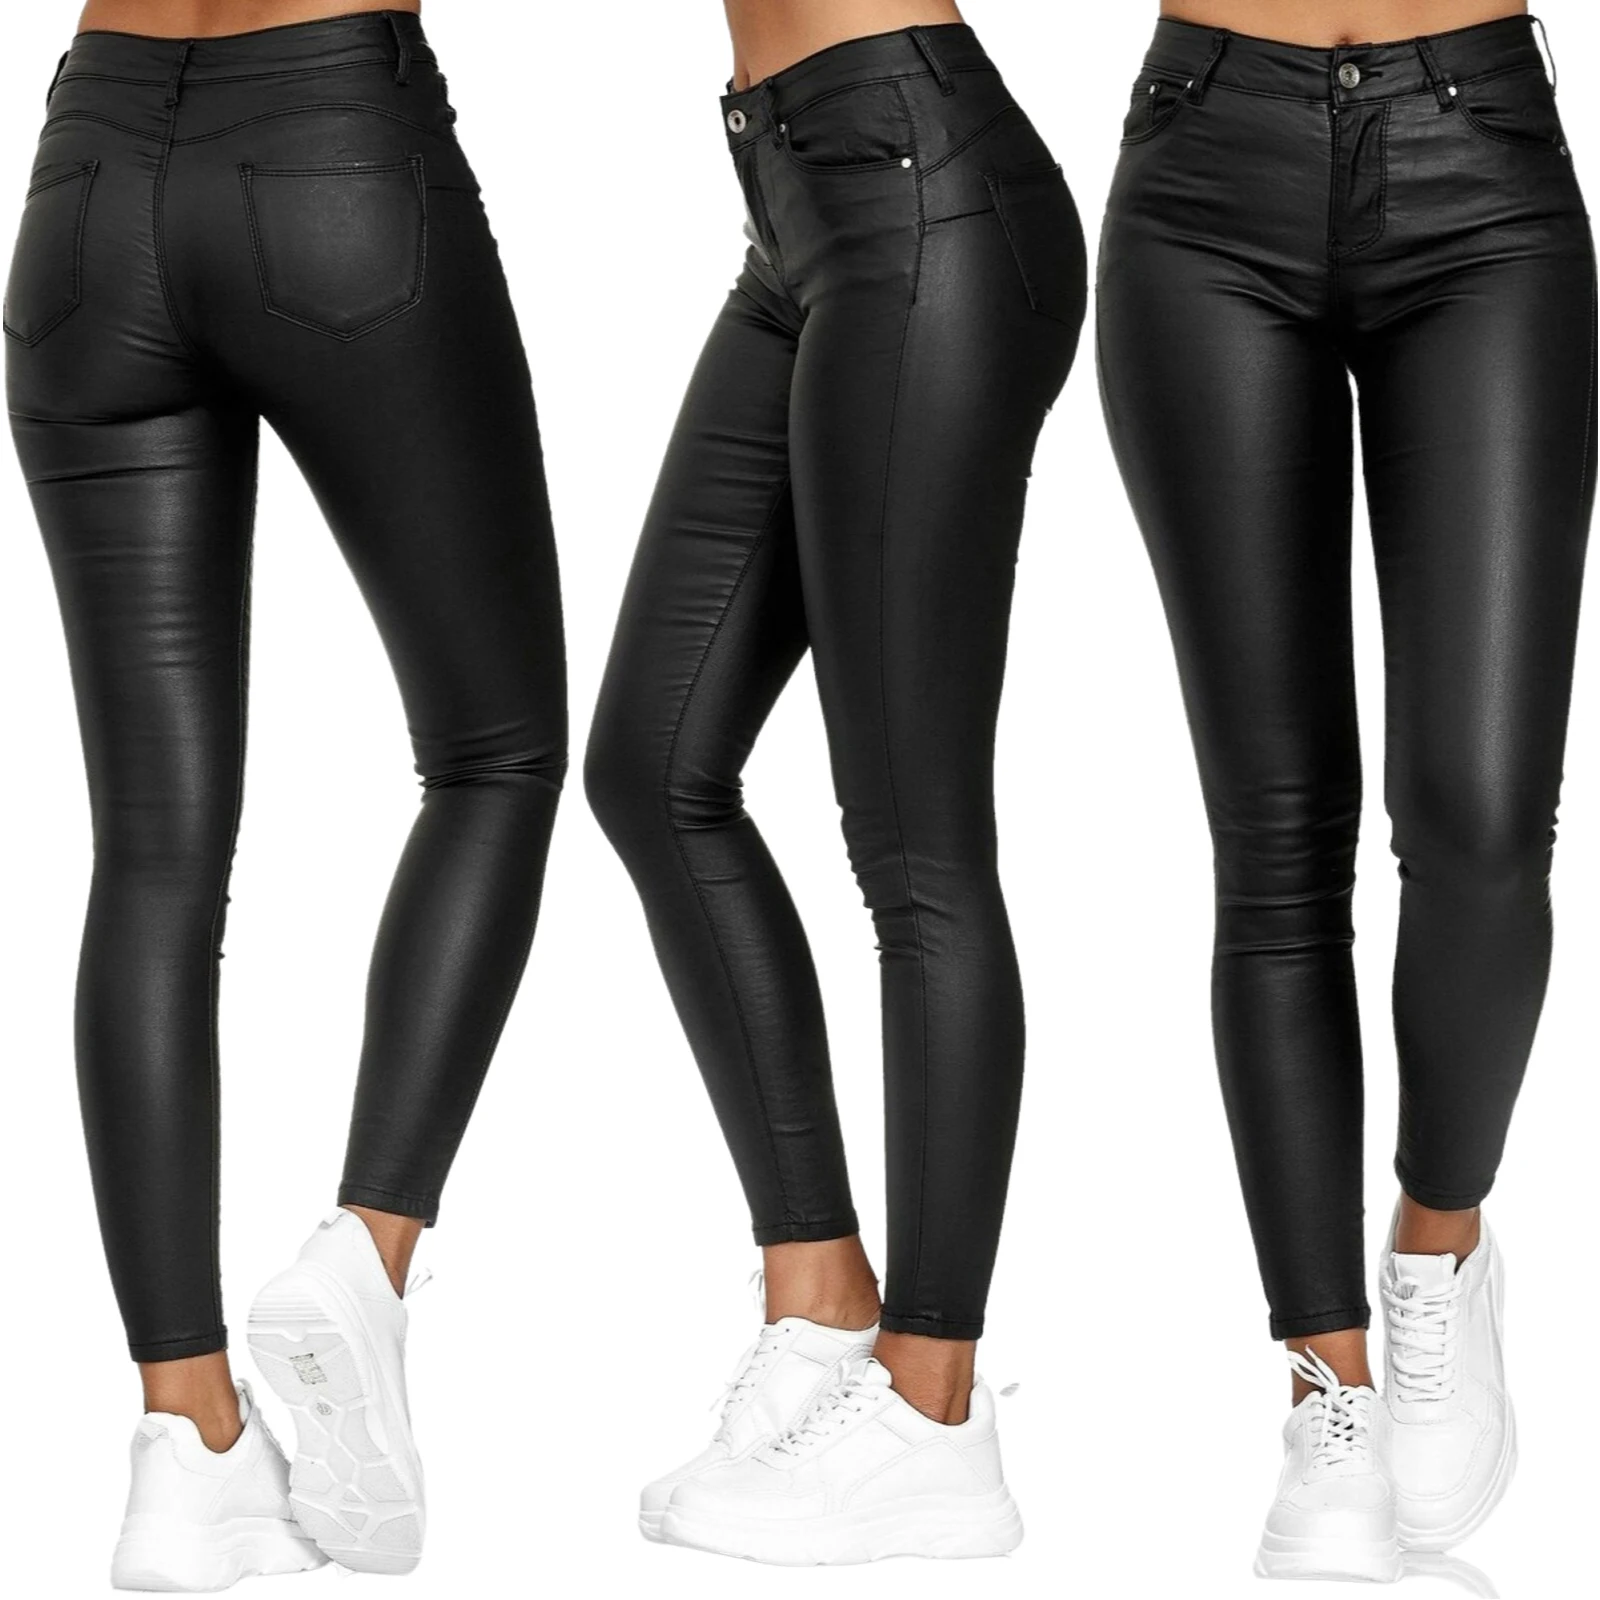 New Women PU Leather Pants High Waist Skinny Push Up Leggings Elastic Trousers Spandex Jeggings Streetwear S-3XL women latex faux pu leather pants trousers push up high waist skinny pants pencil fall winter solid color sexy pants female